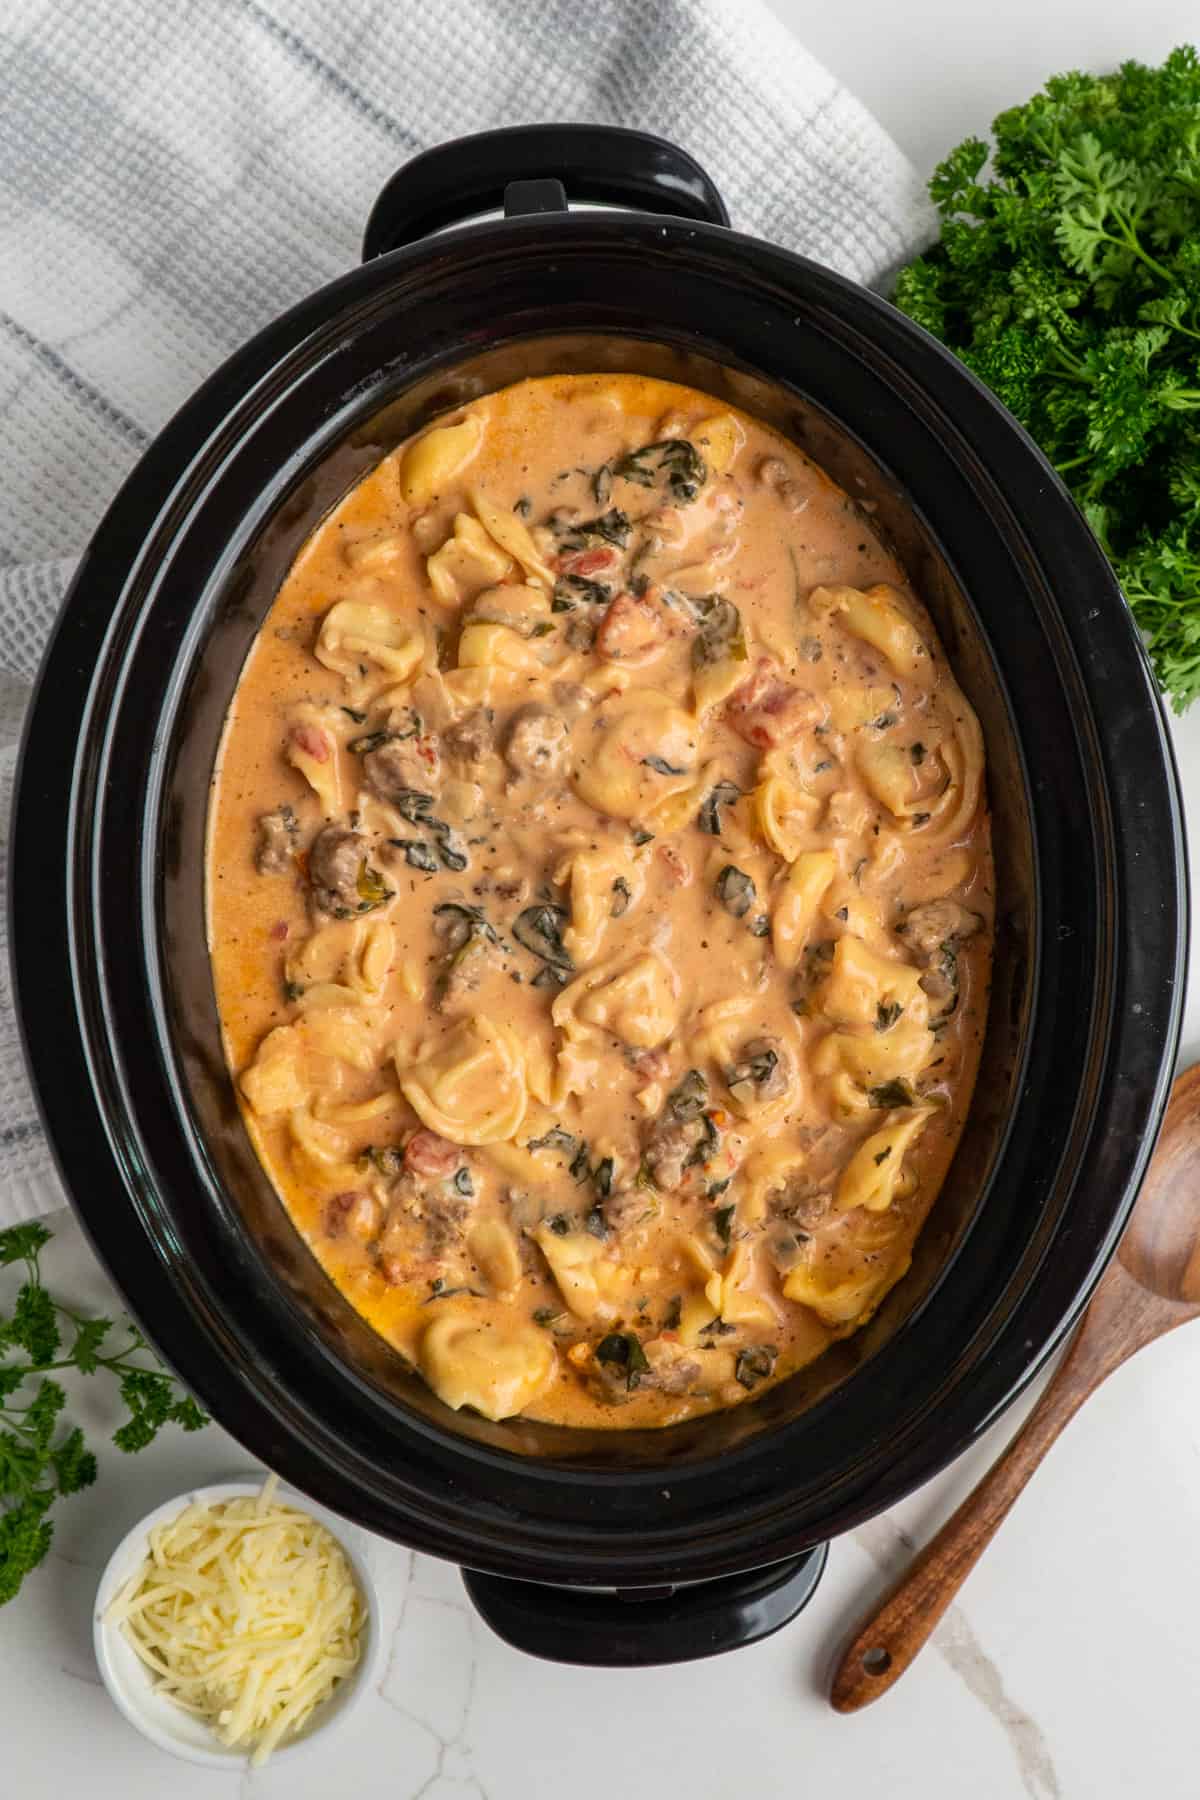 Overhead look at creamy and cheesy tortellini in a slow cooker.